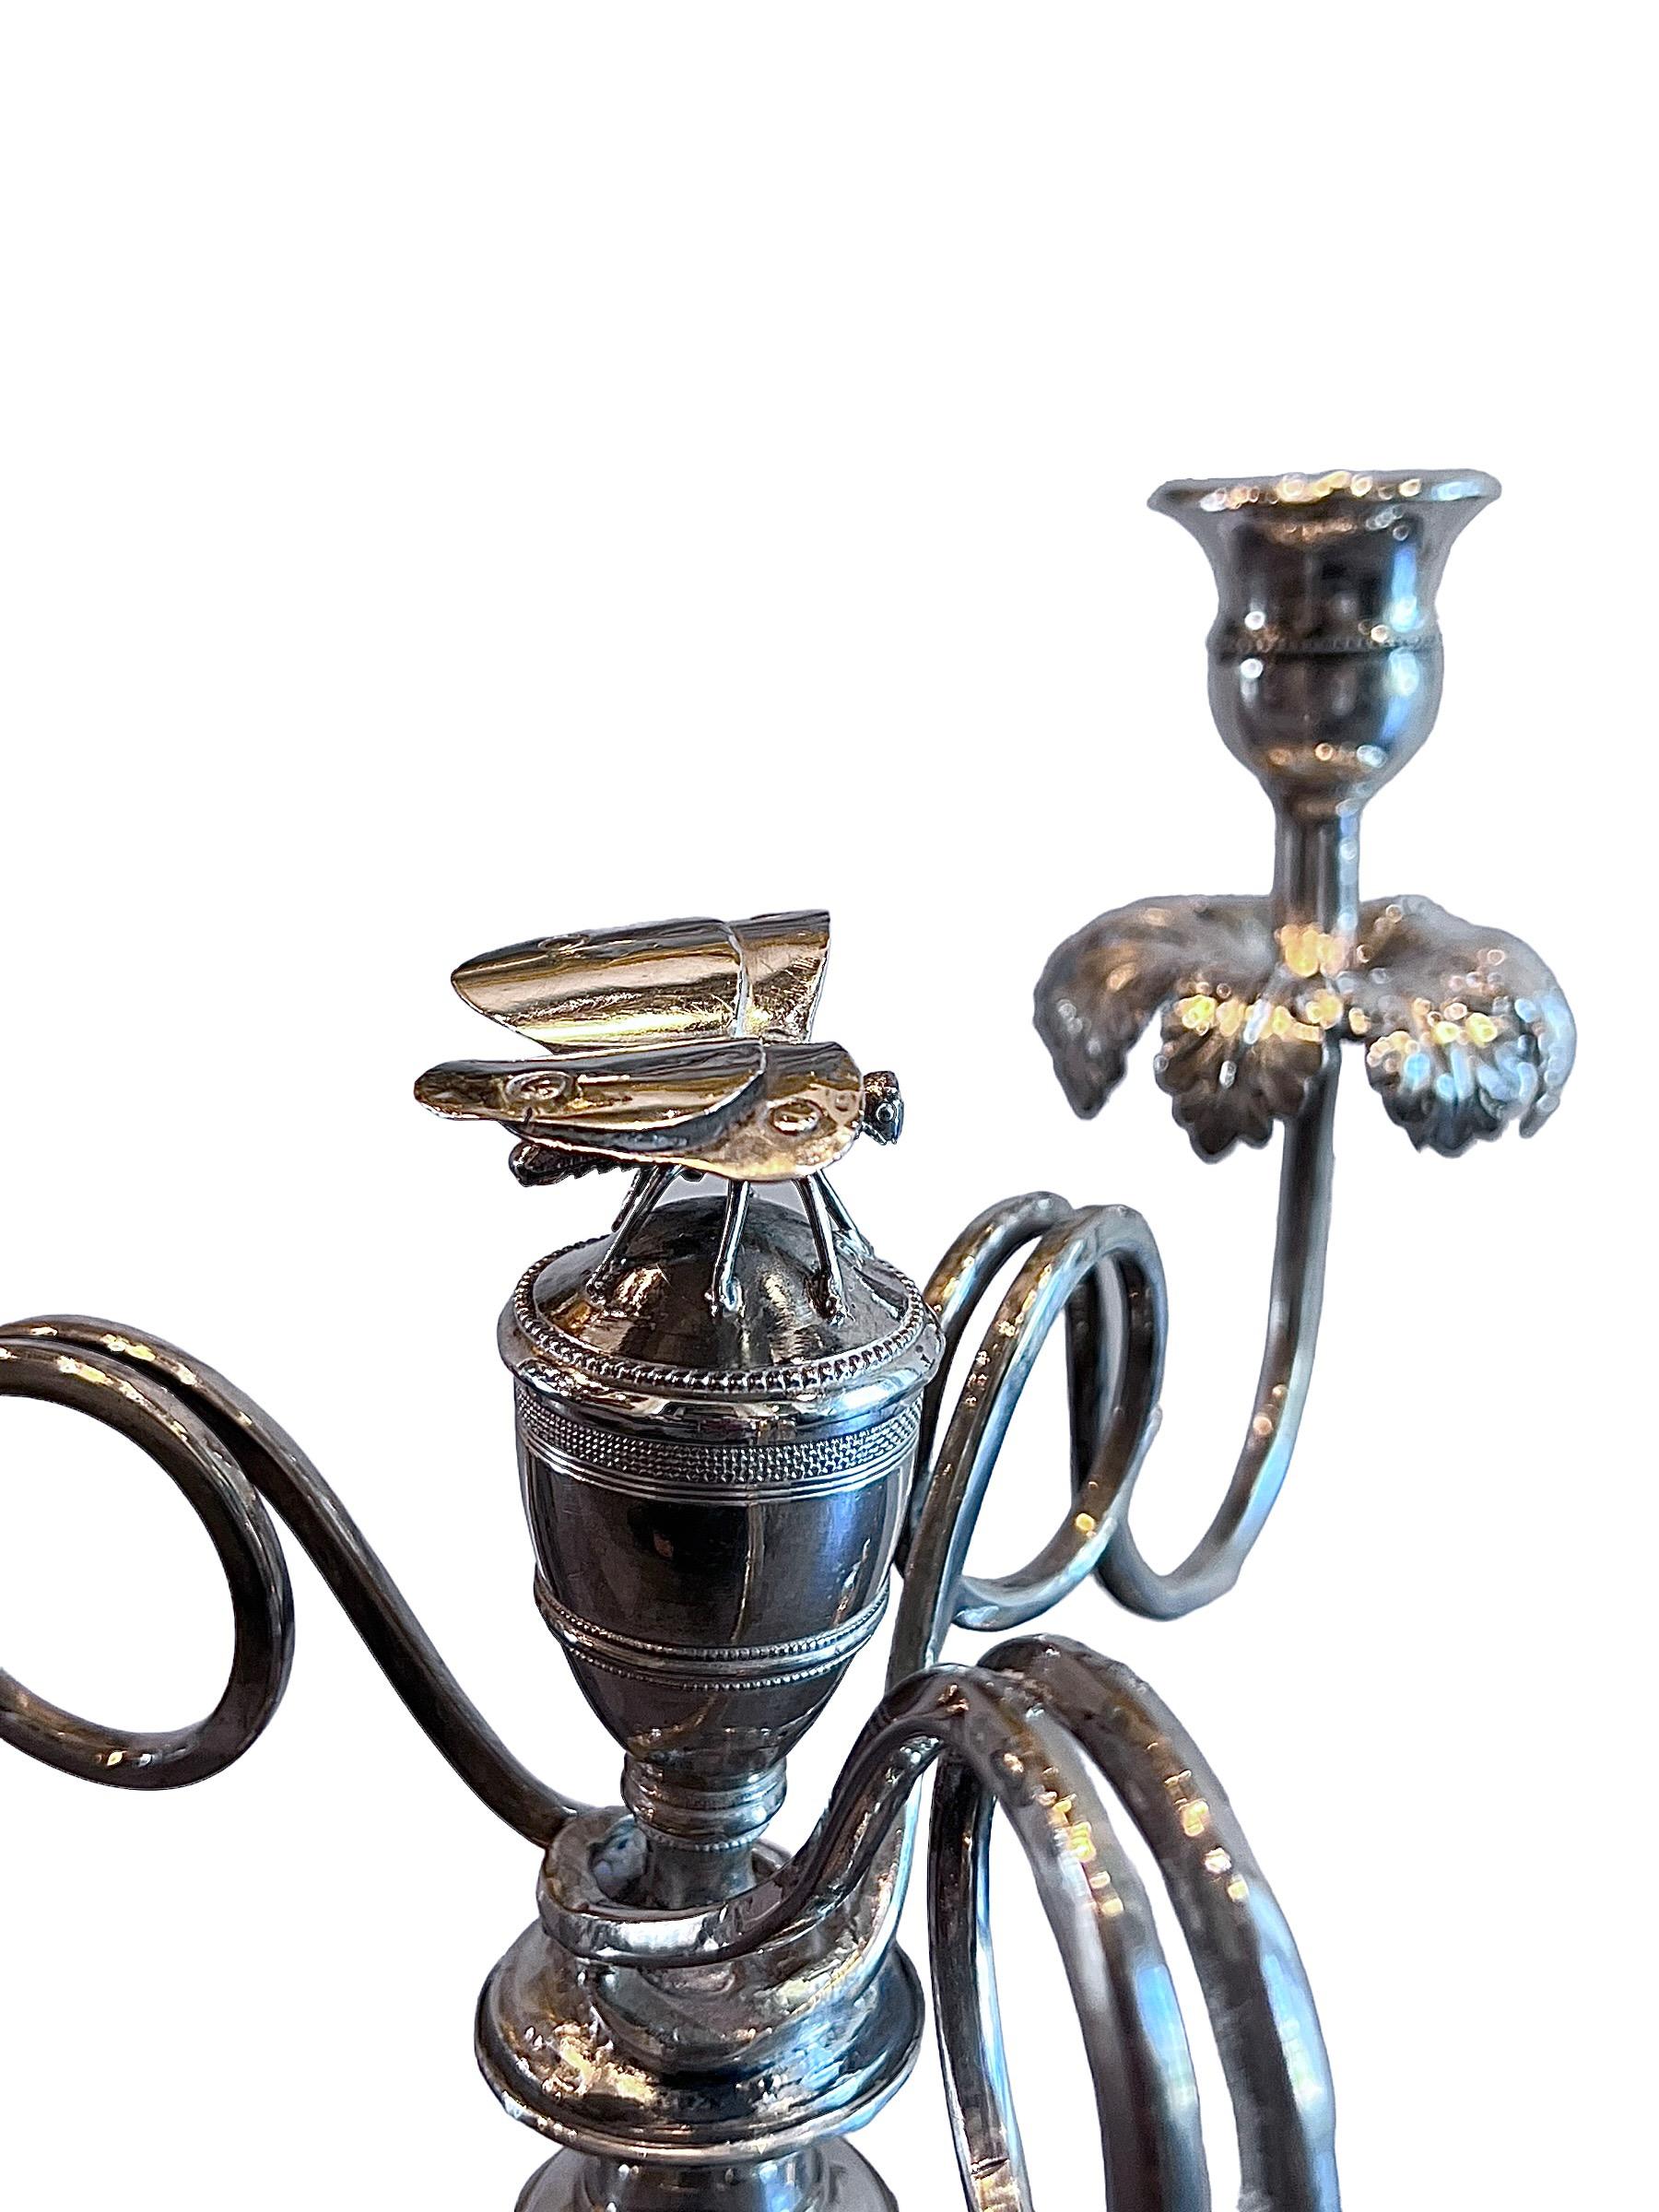 19th Century Pair of 1820s Italian Touring Sterling Silver Candelabras